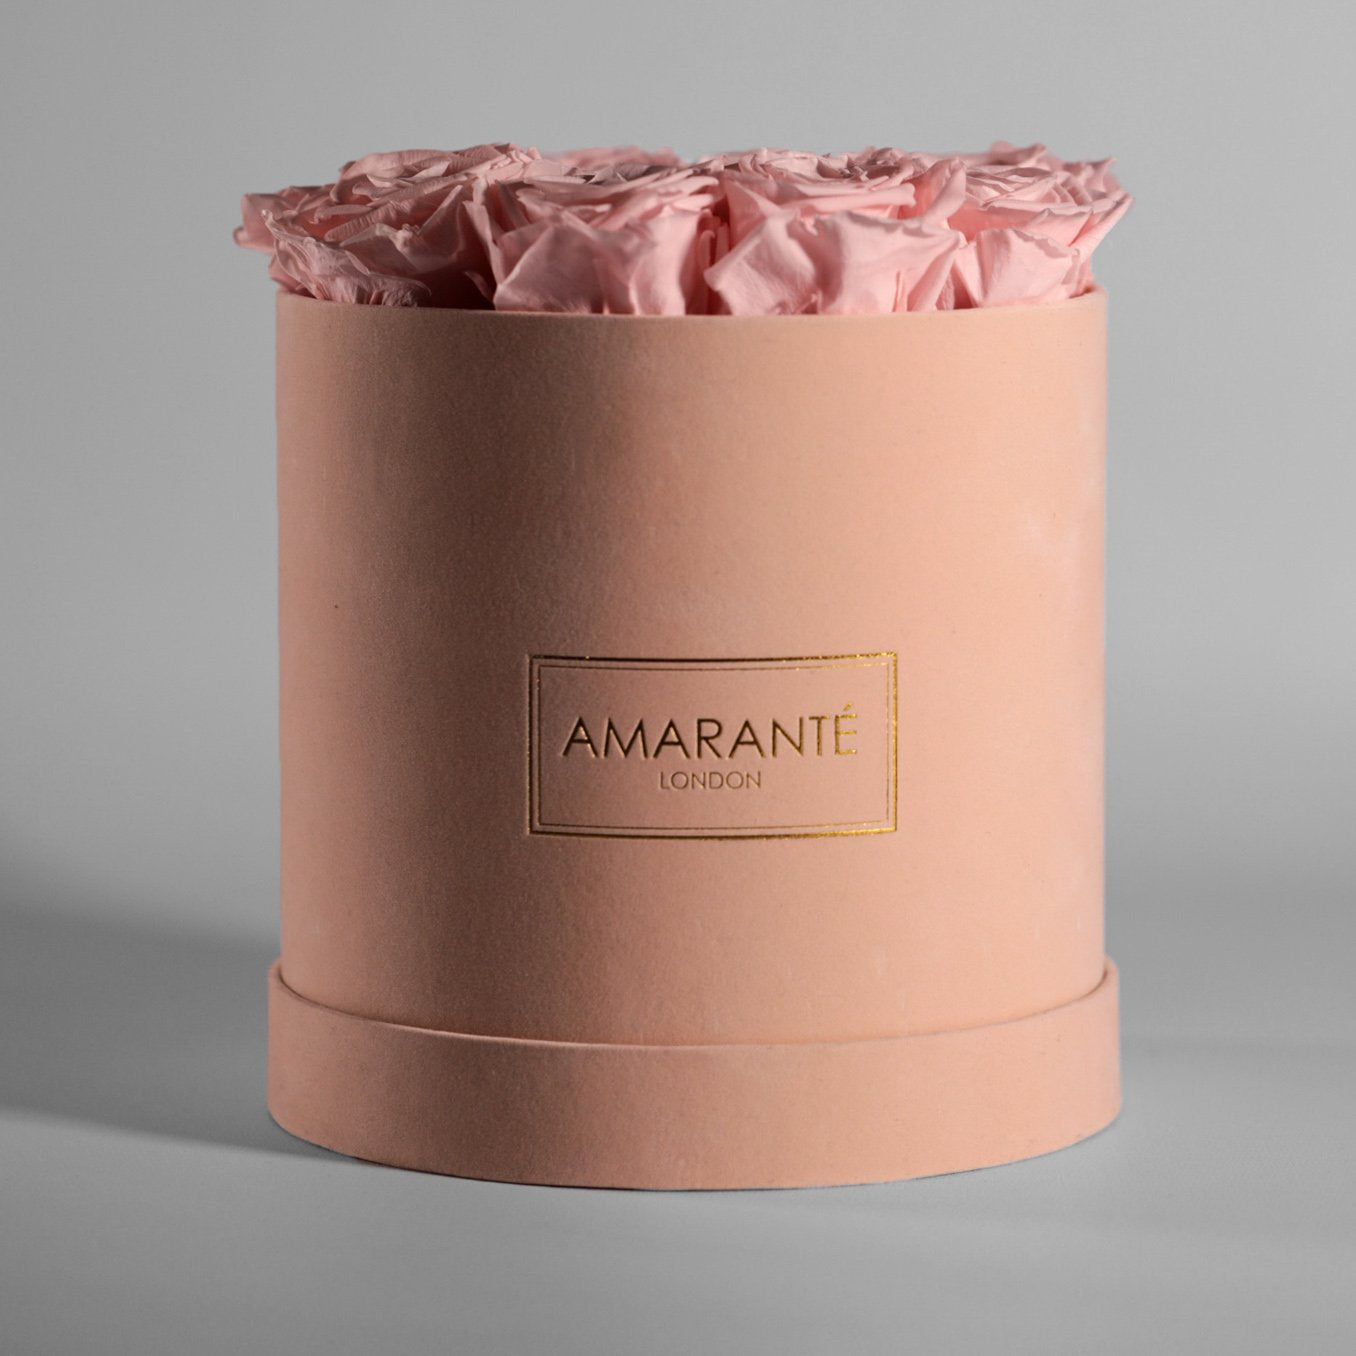 Blushing light pink roses encompassed in a stunning beige box. 